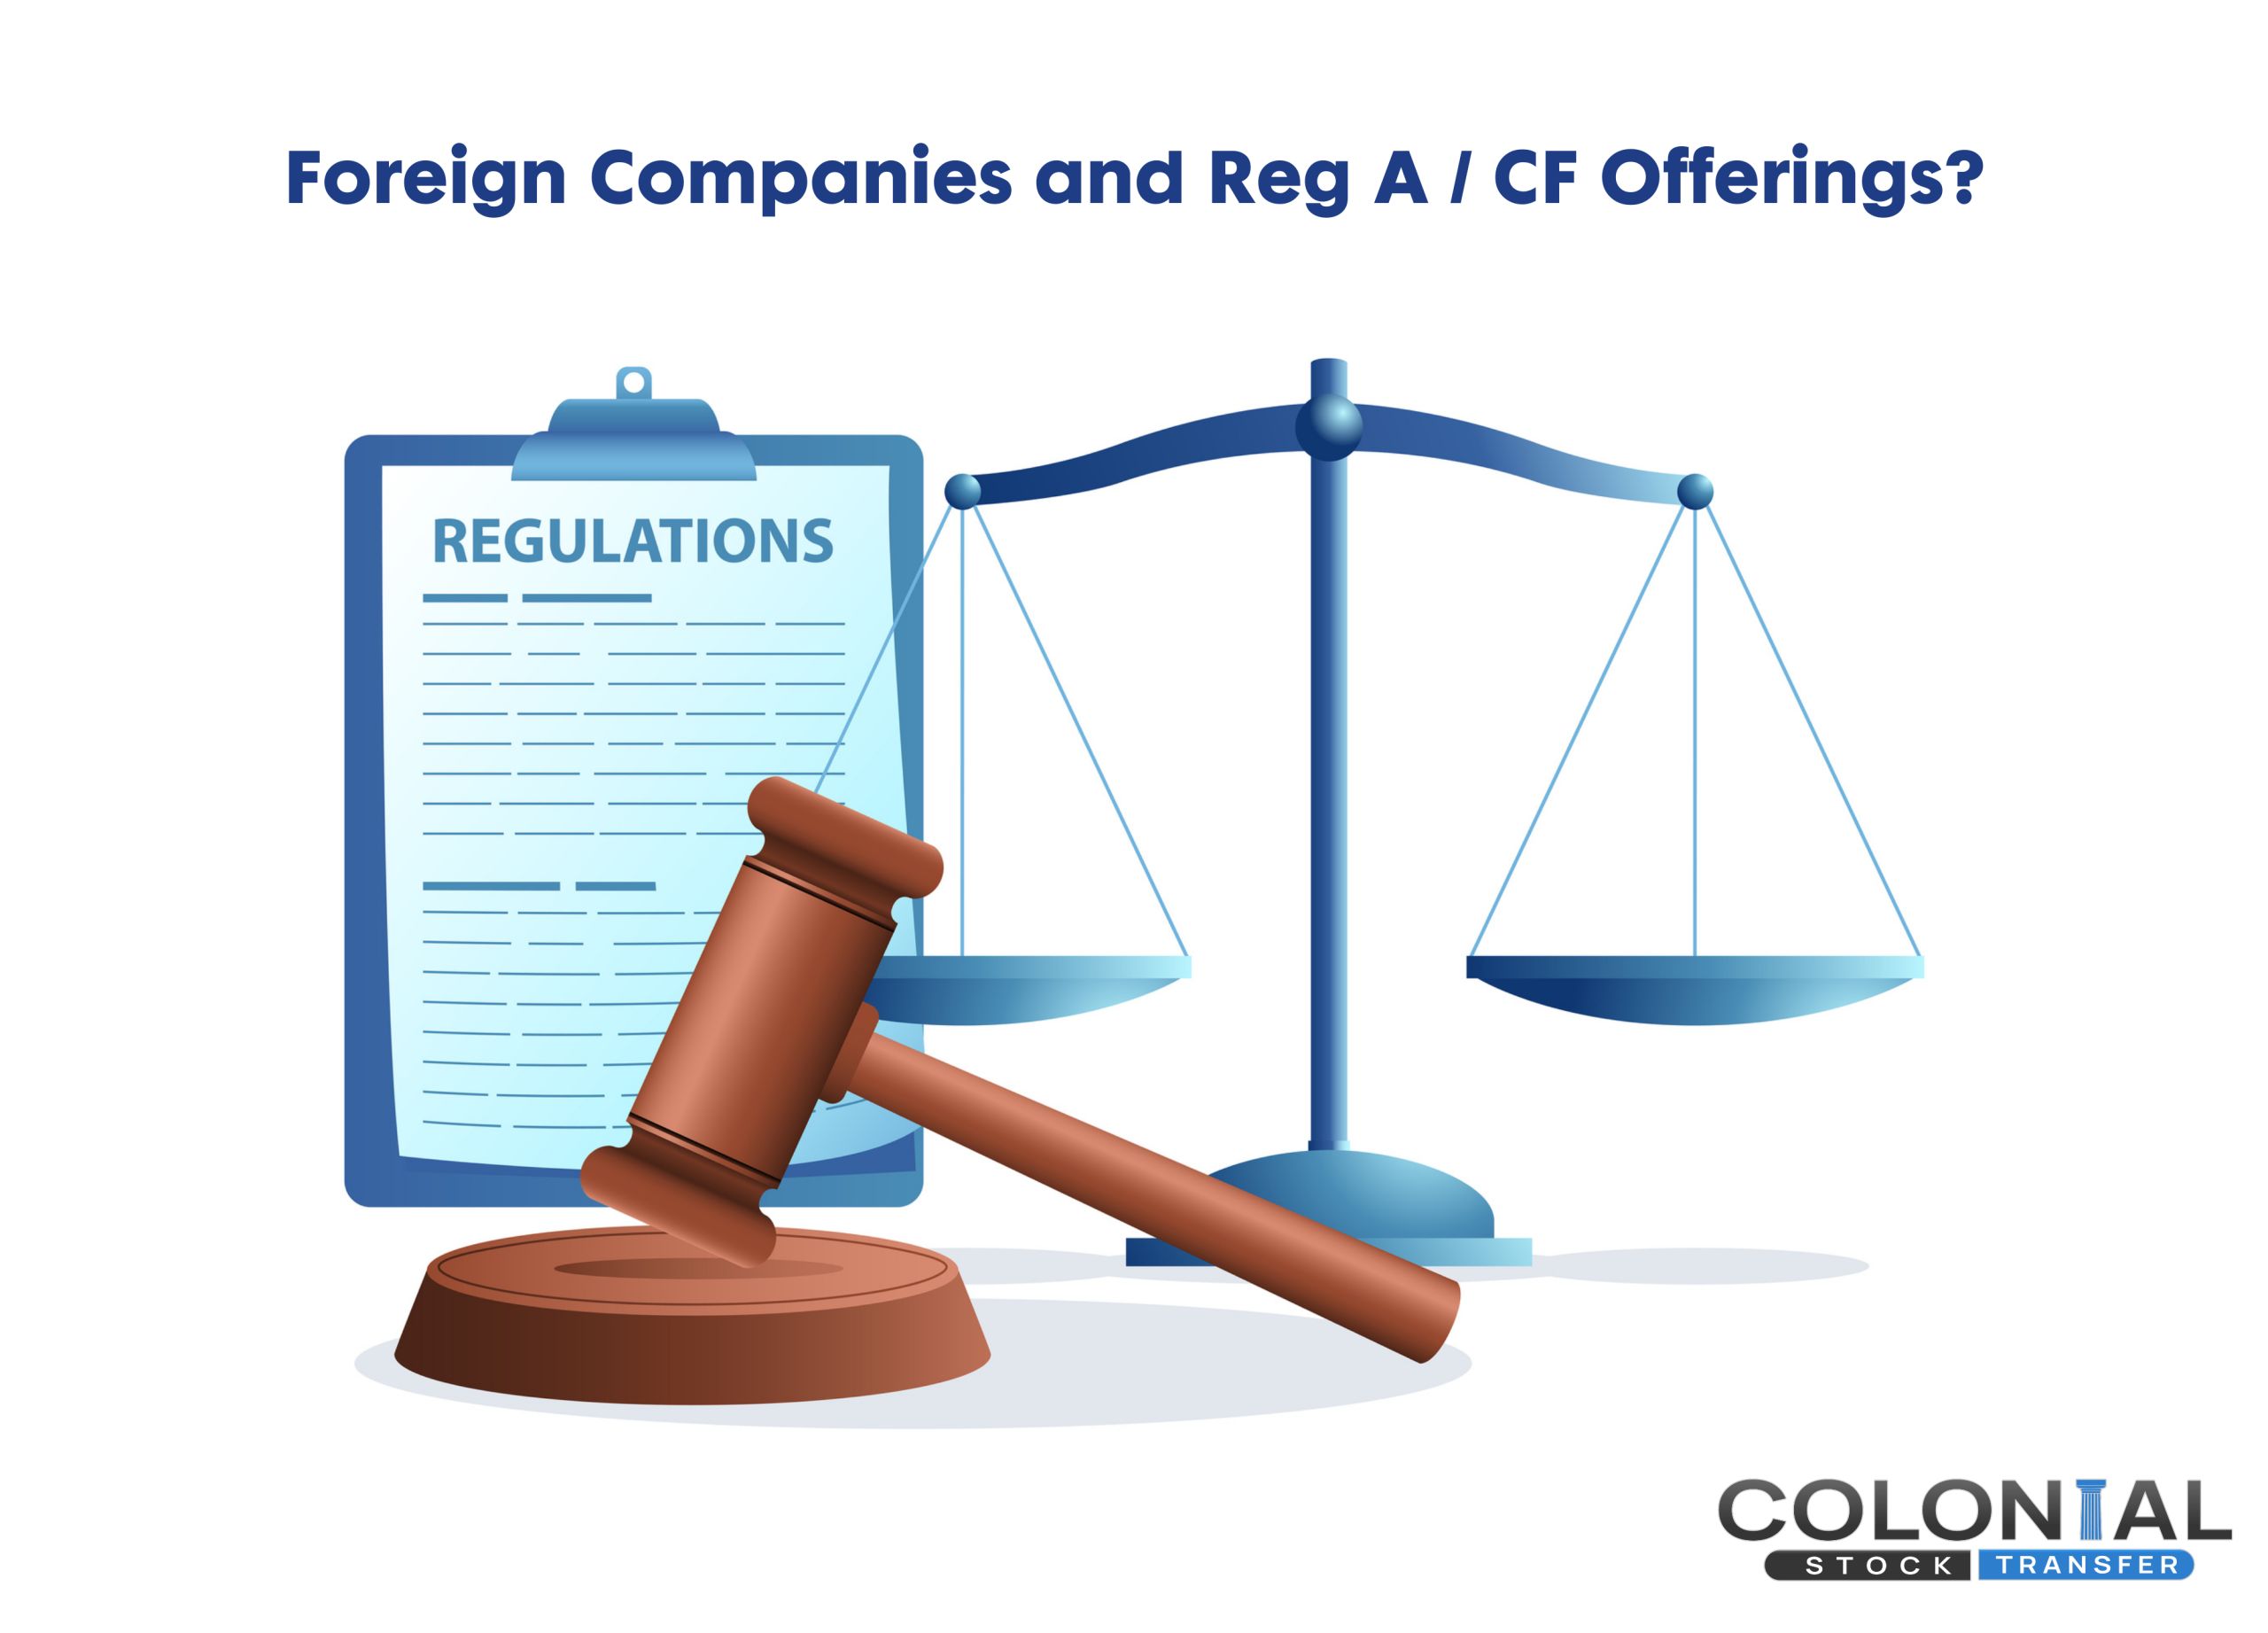 Can Foreign Companies do a Reg A or Reg CF Offering?